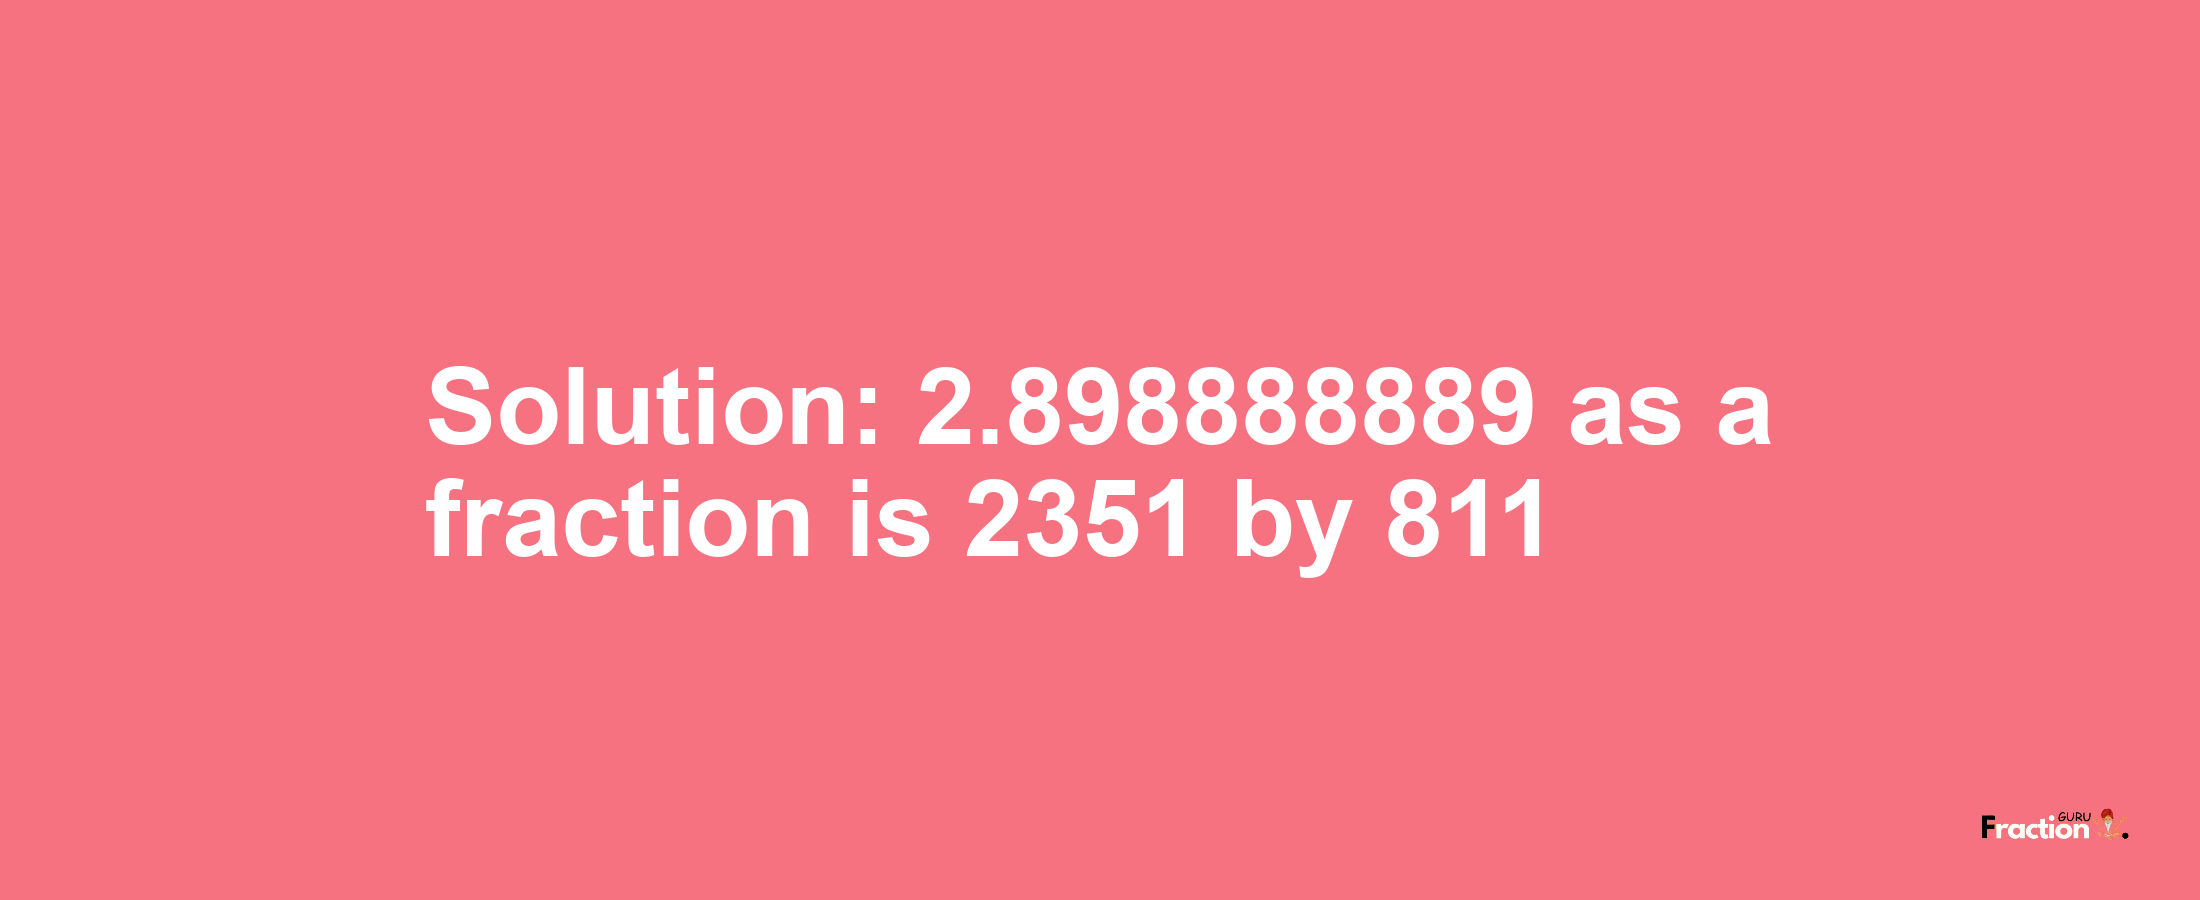 Solution:2.898888889 as a fraction is 2351/811